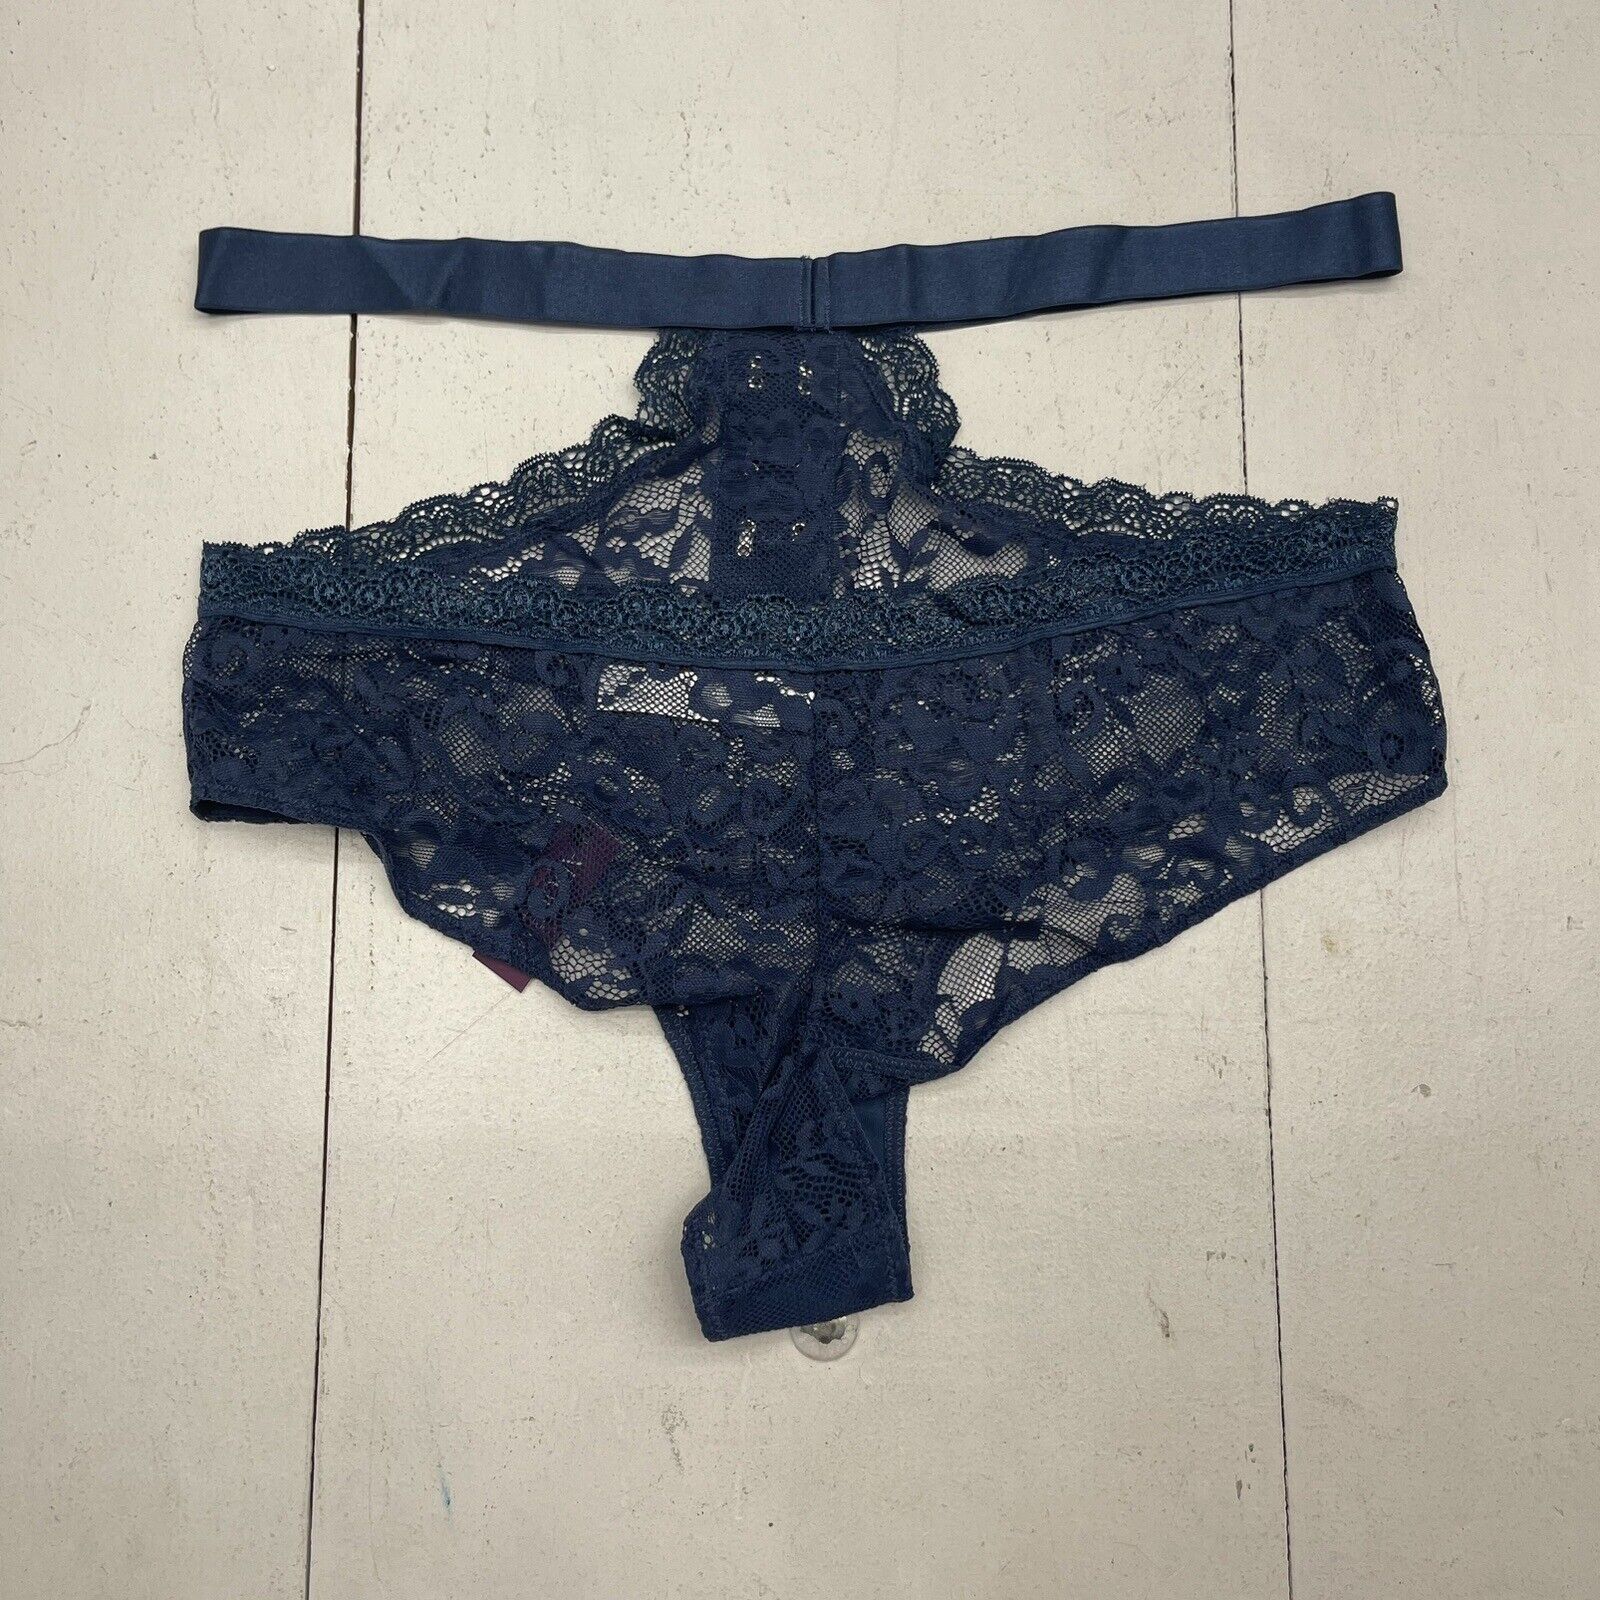 Adore Me Blue Cheeky Lace Underwear Women's Size Large New - beyond exchange